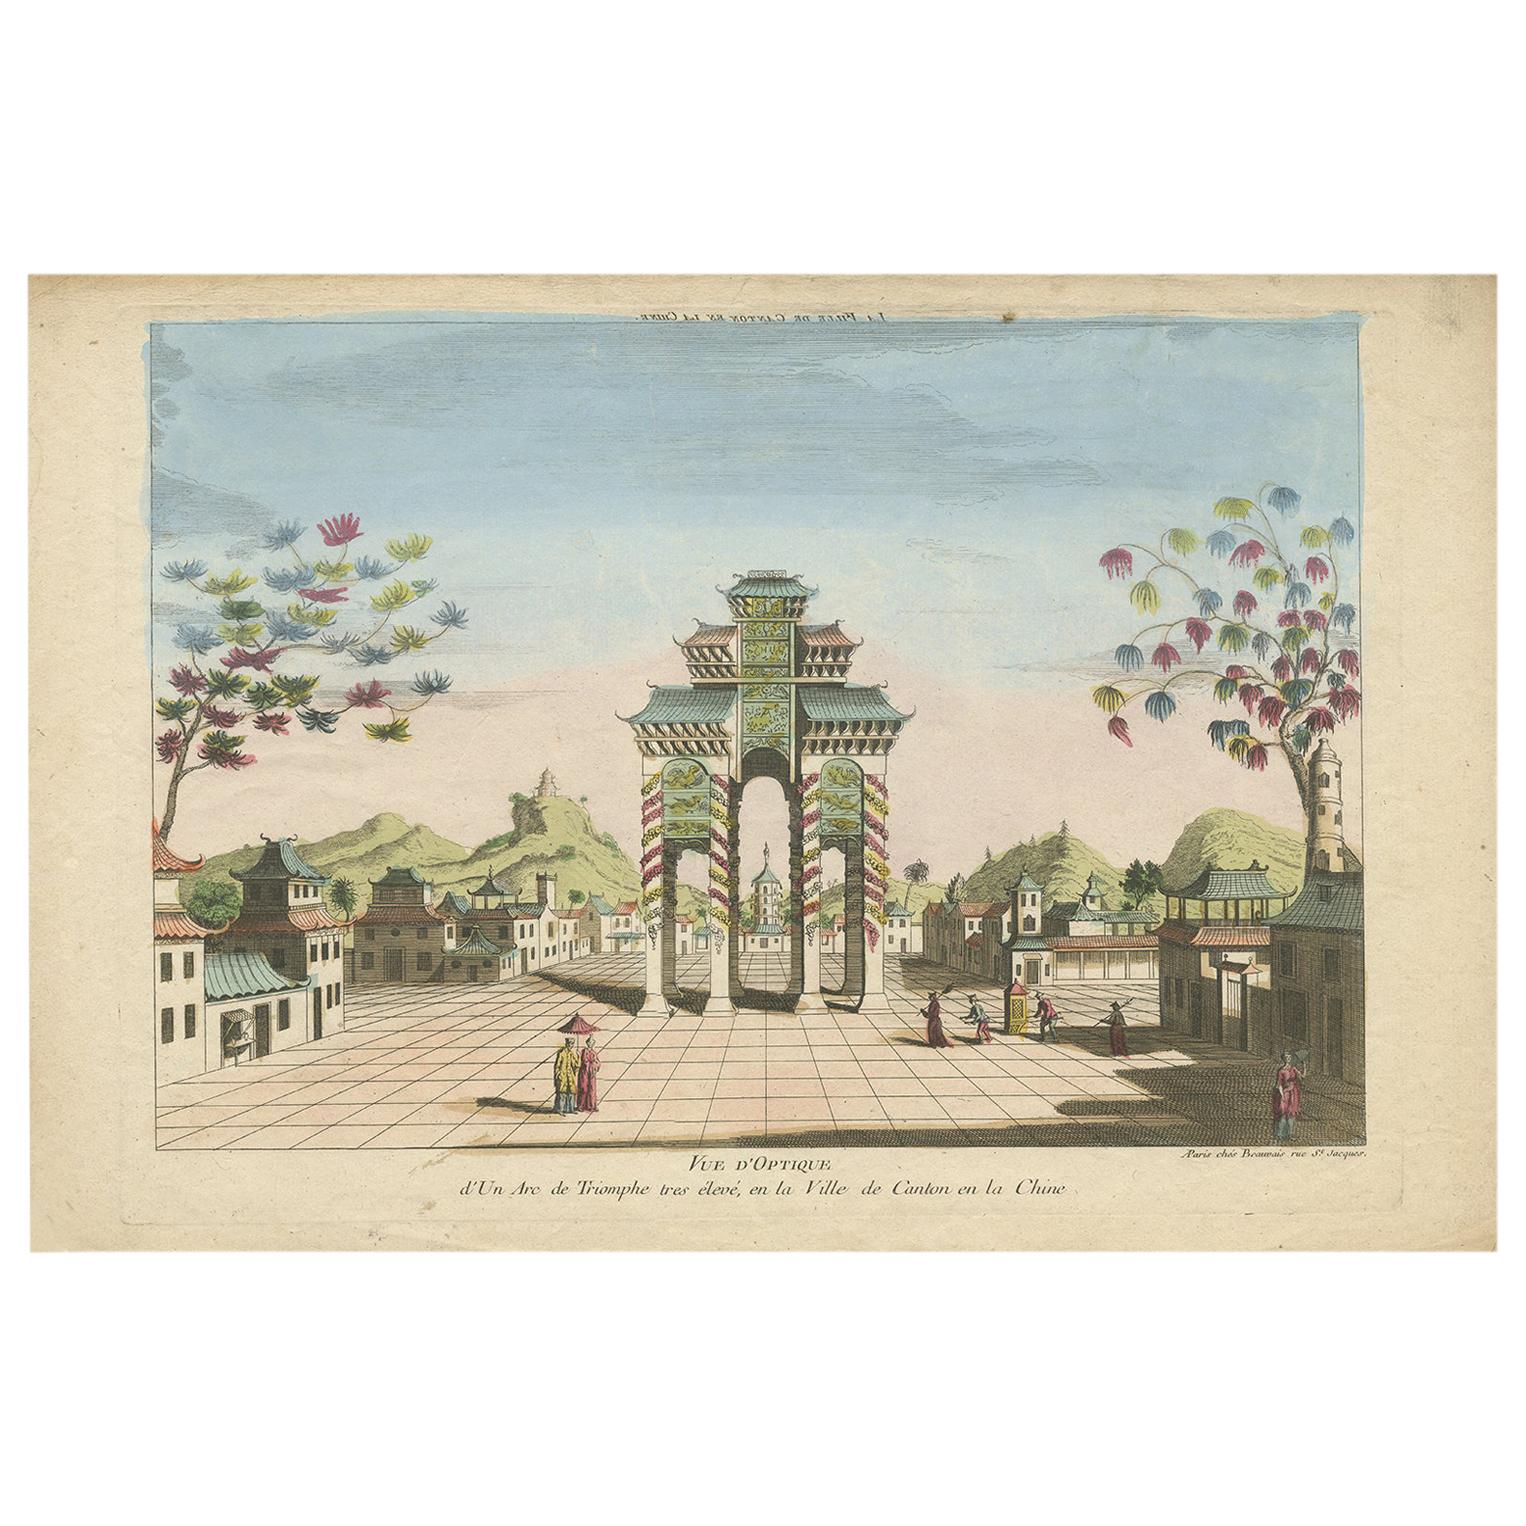 Antique Print of a Triumphal Arch in Guangzhou by Beauvais, circa 1700